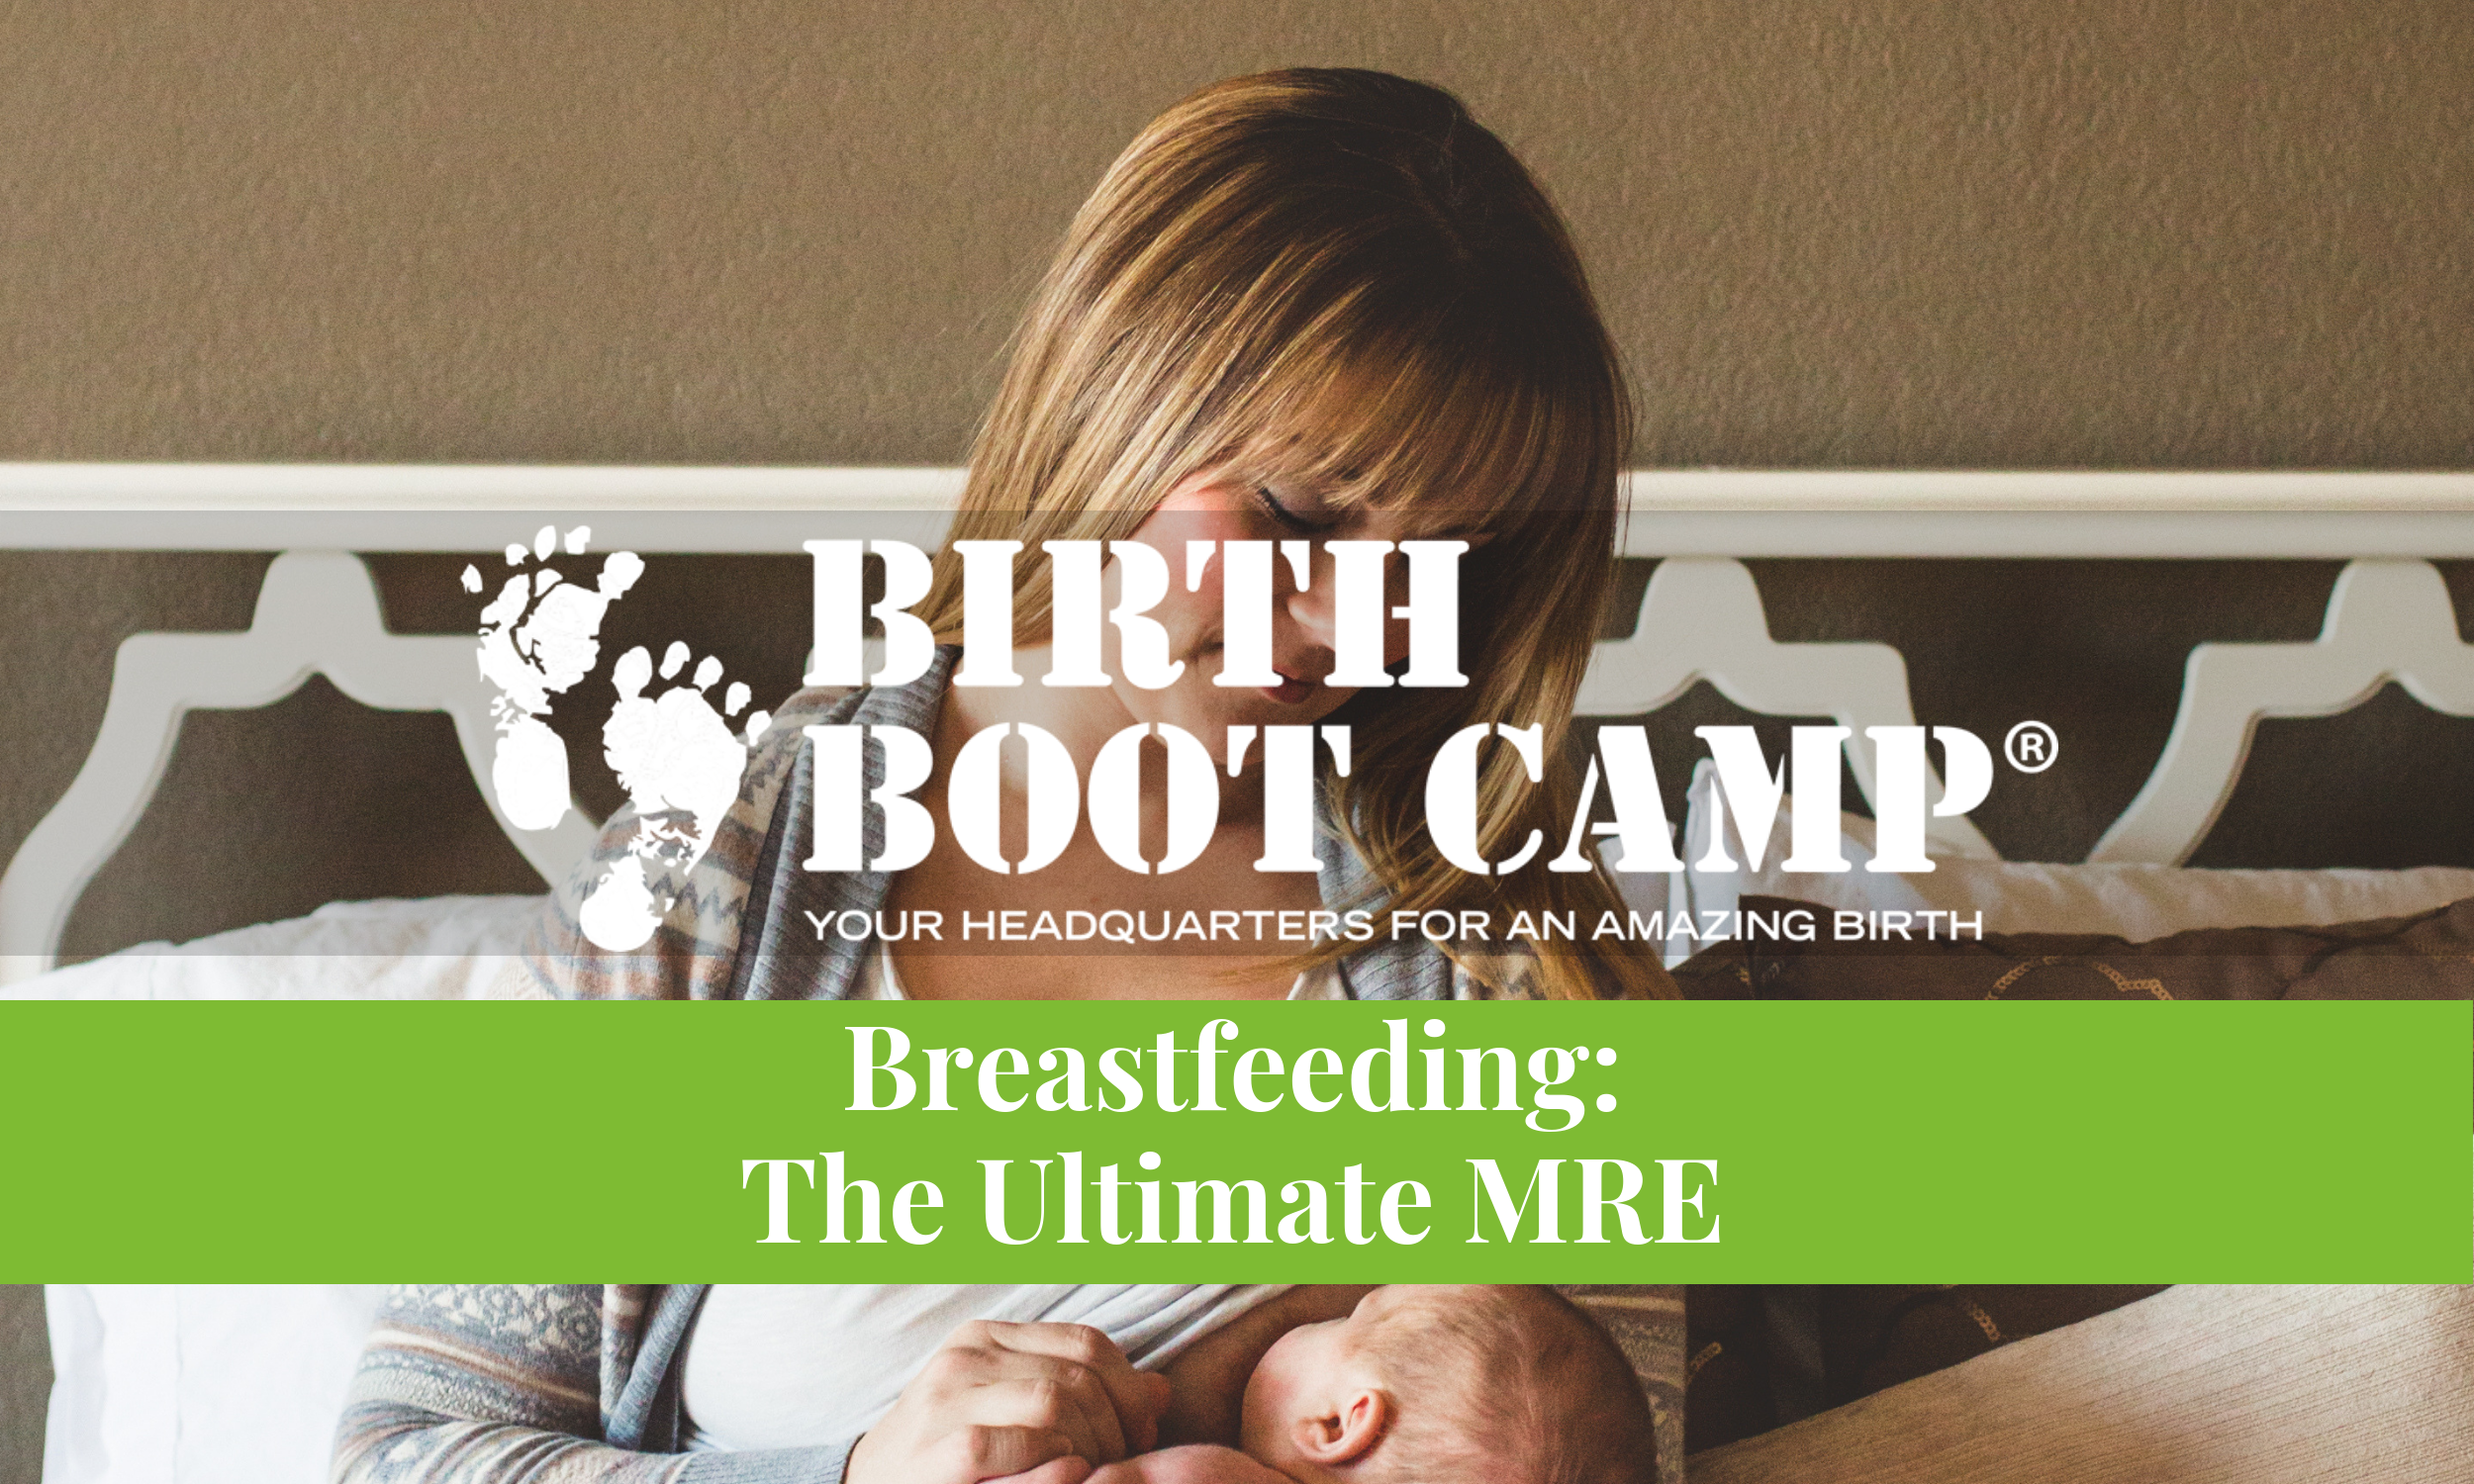 Birth Boot Camp Breastfeeding: The Ultimate MRE